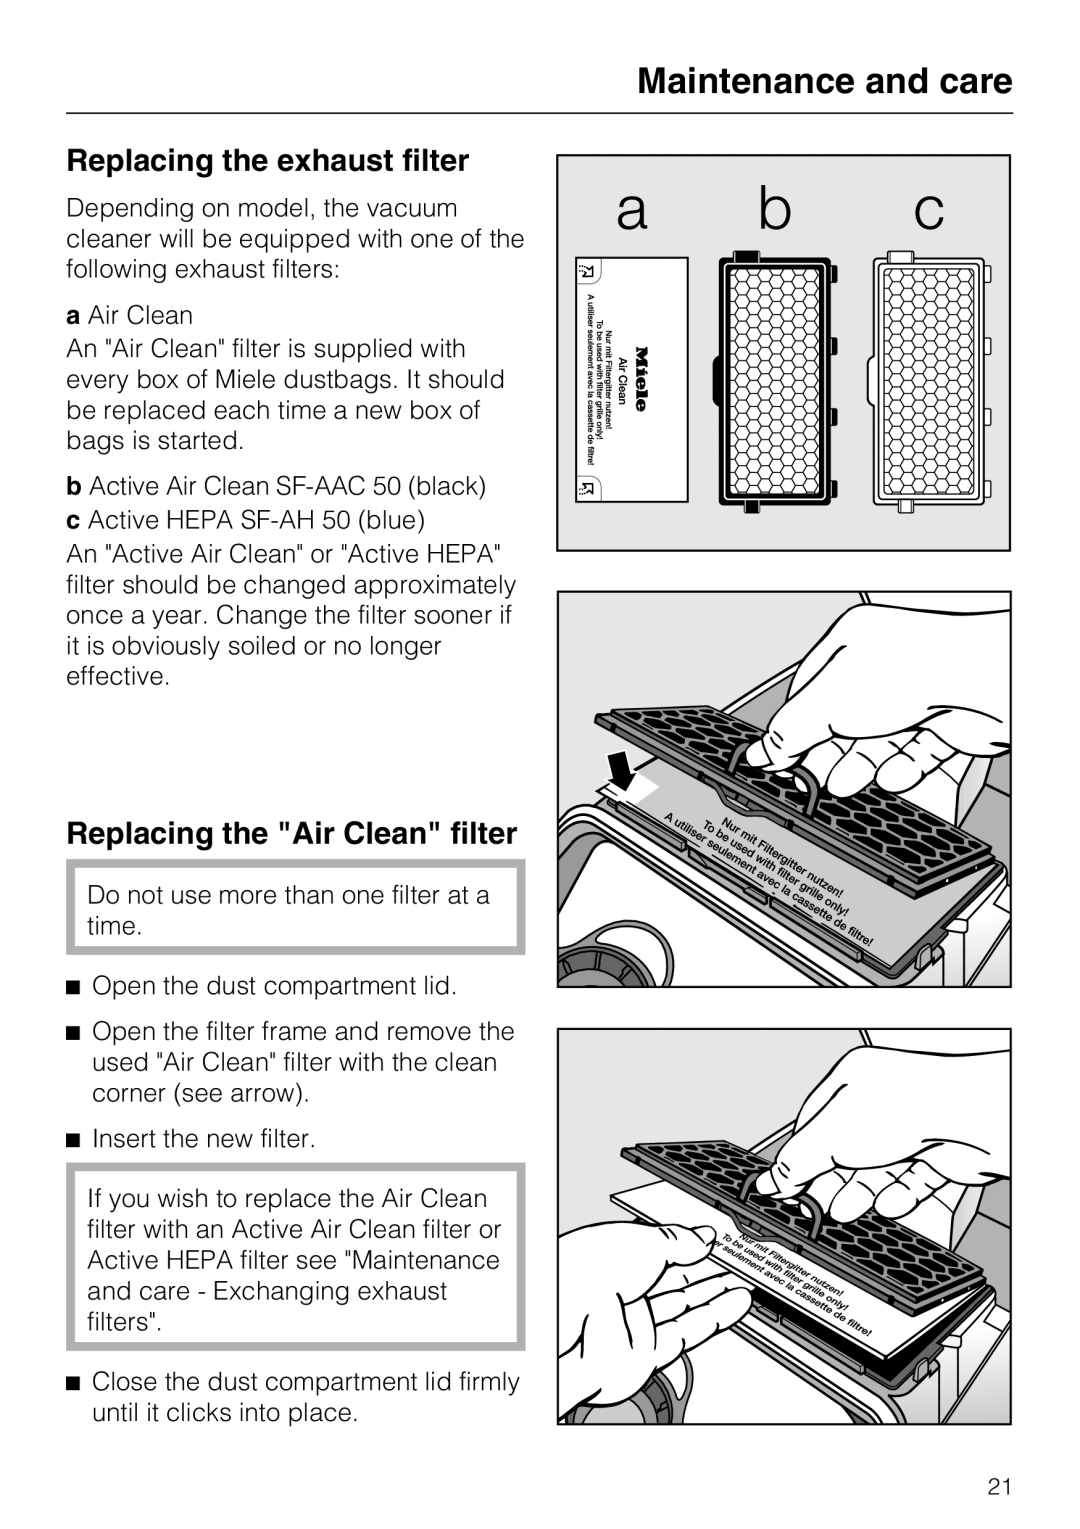 Miele S 6000 operating instructions Maintenance and care, Replacing the exhaust filter, Replacing the Air Clean filter 